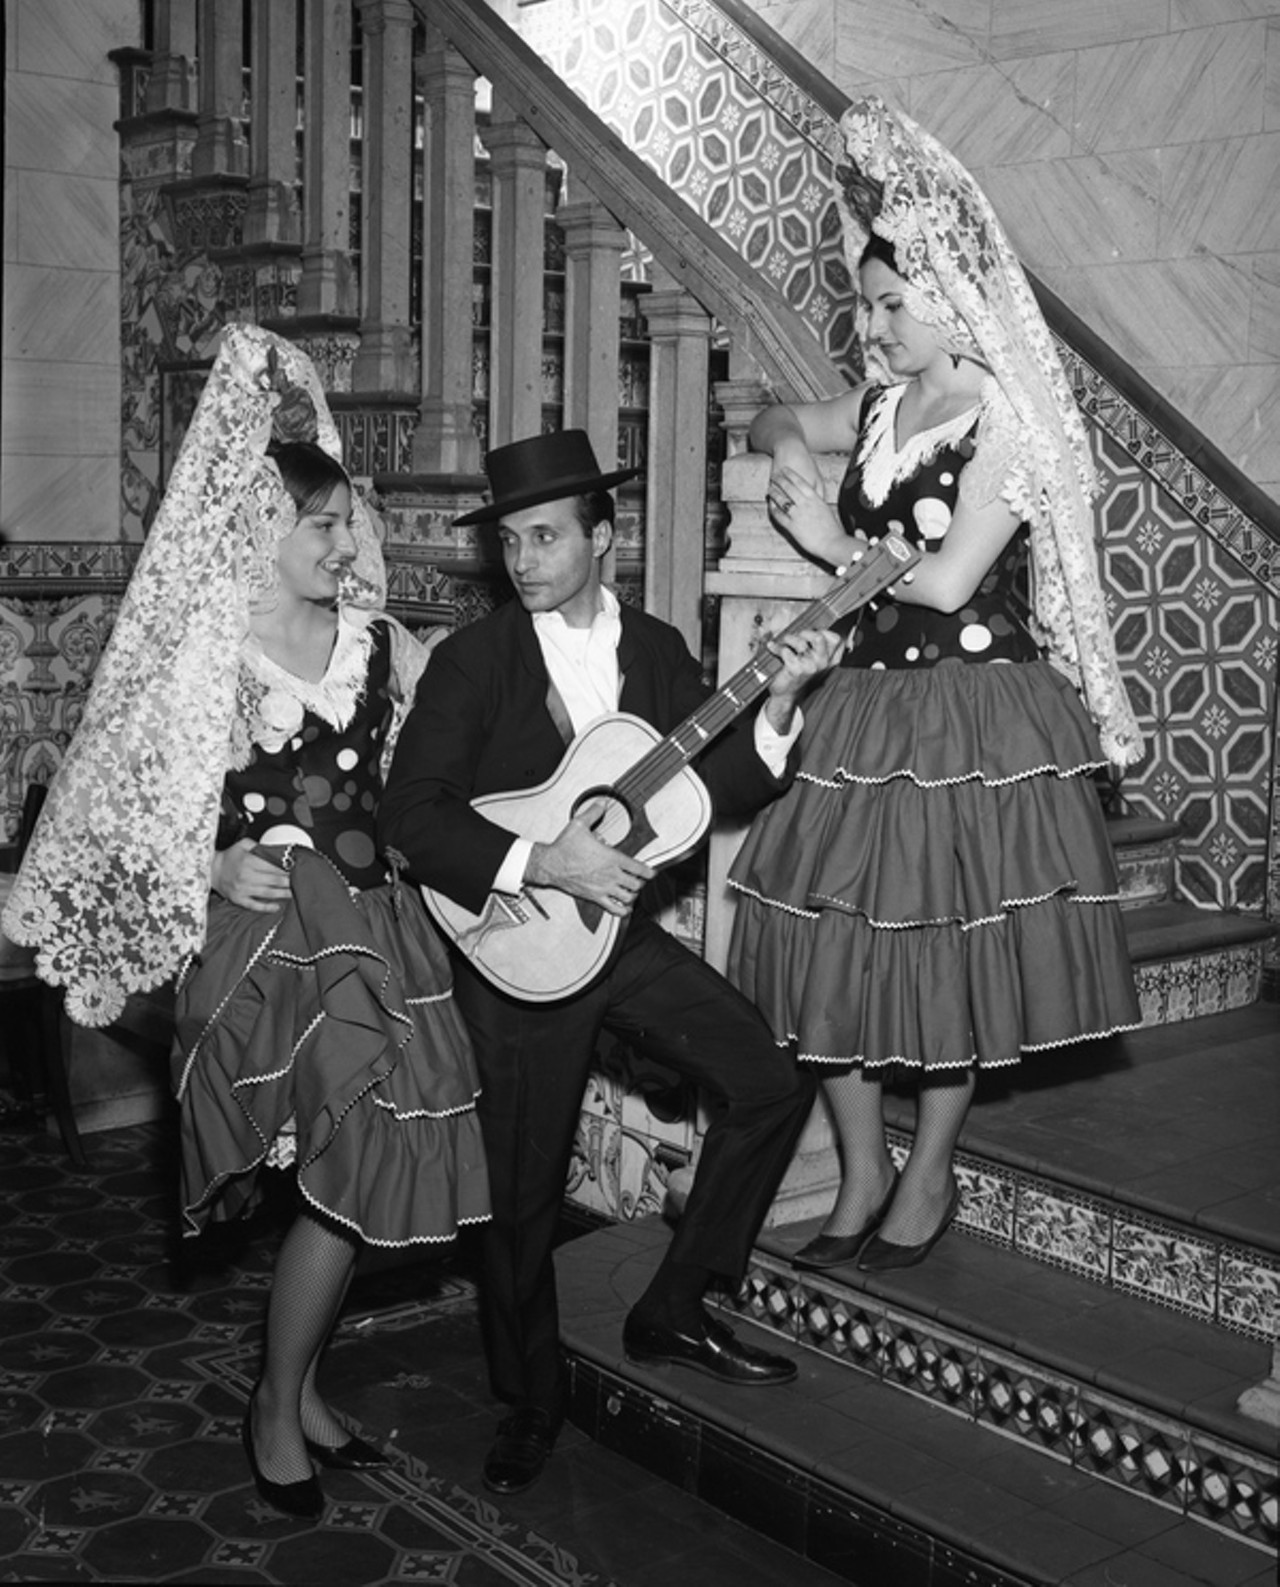 People in Spanish dress at the Columbia Restaurant, published in 1968